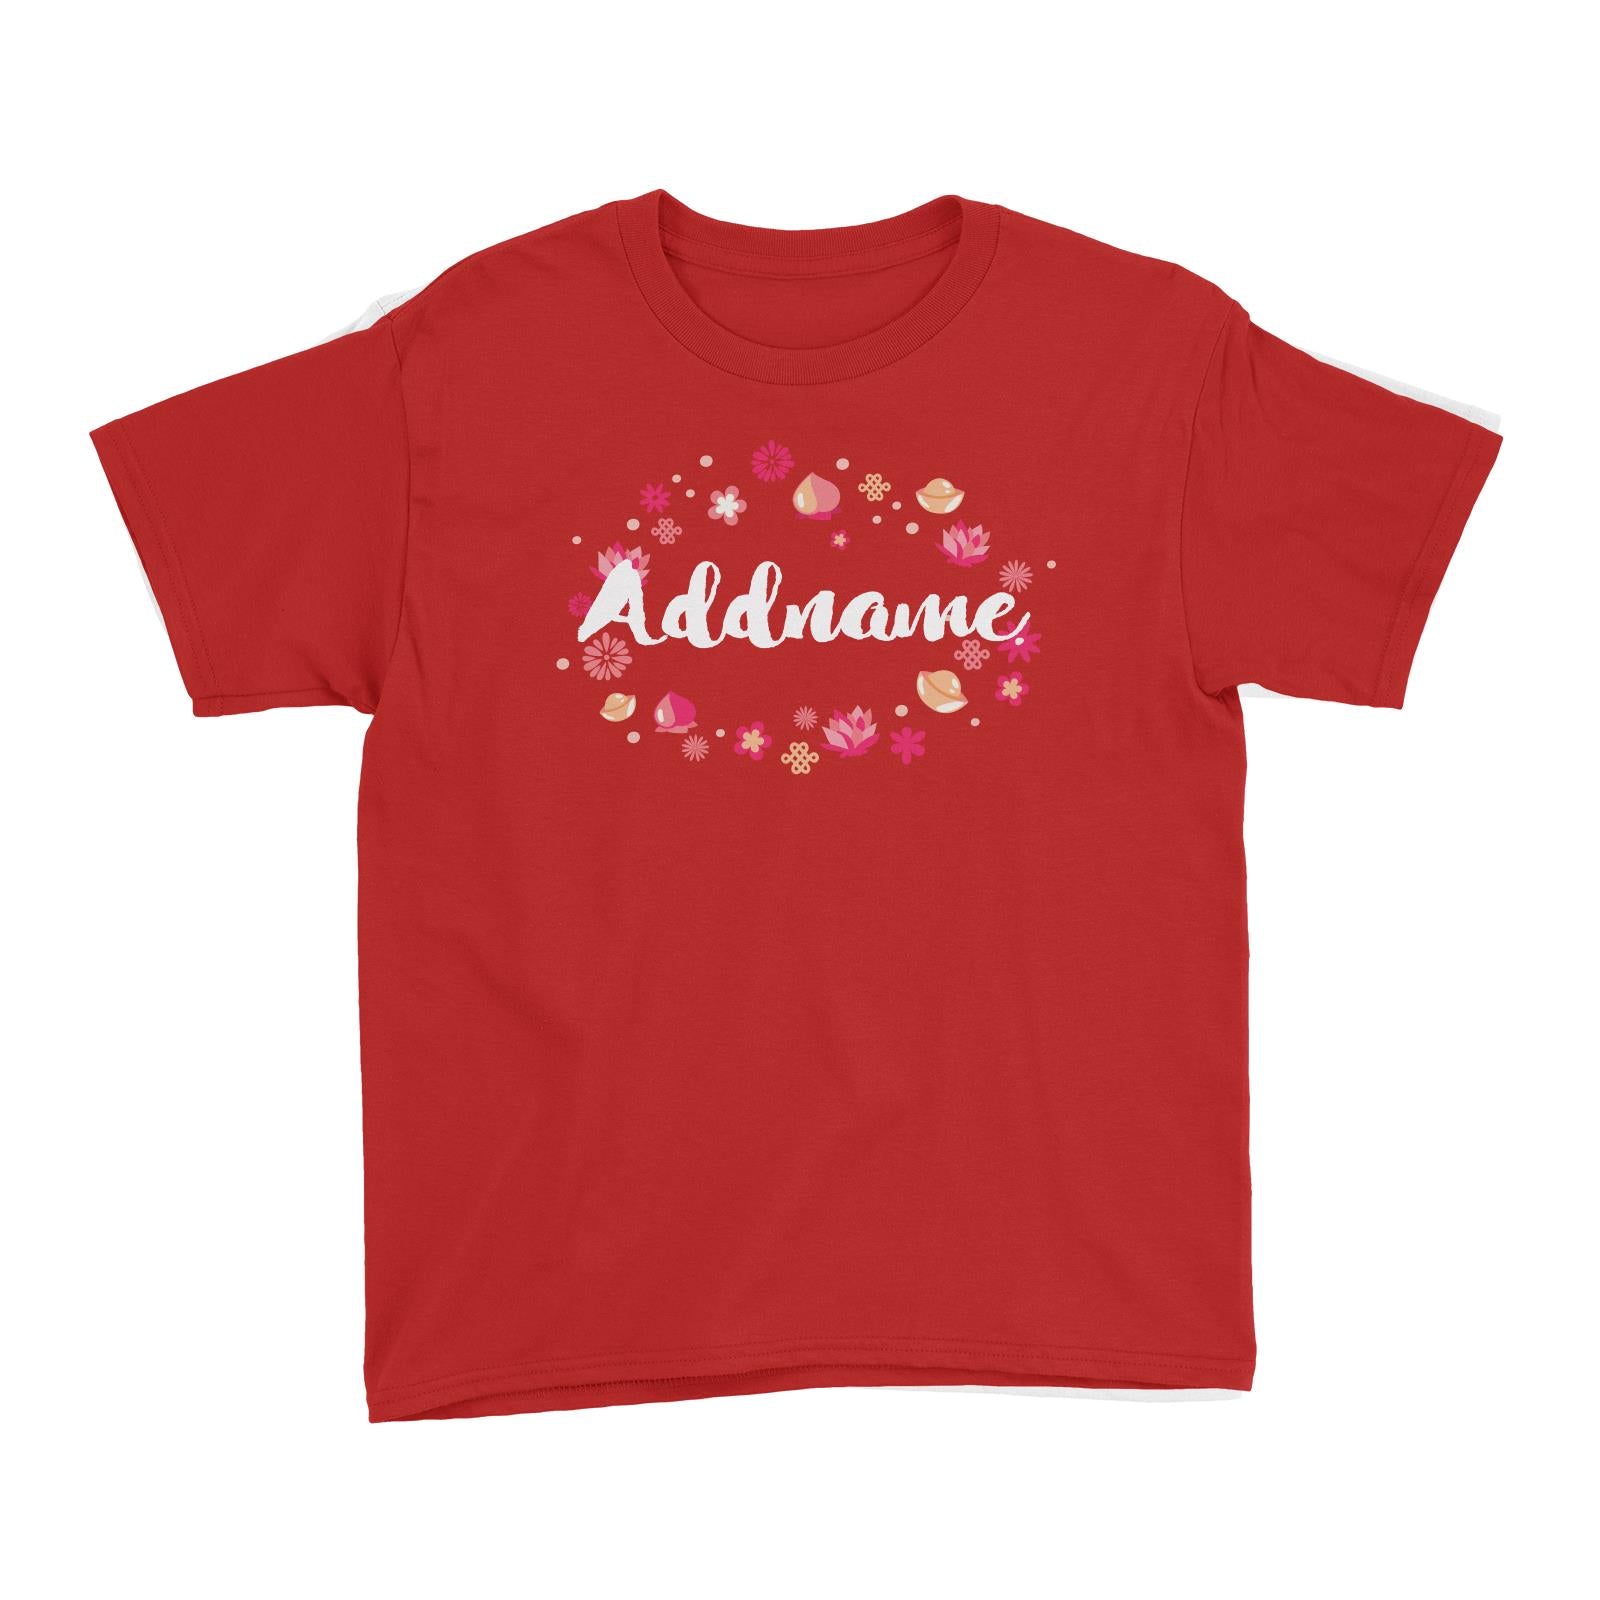 Chinese New Year Addname with Chinese New Year Elements Kid's T-Shirt  Personalizable Designs CNY Elements